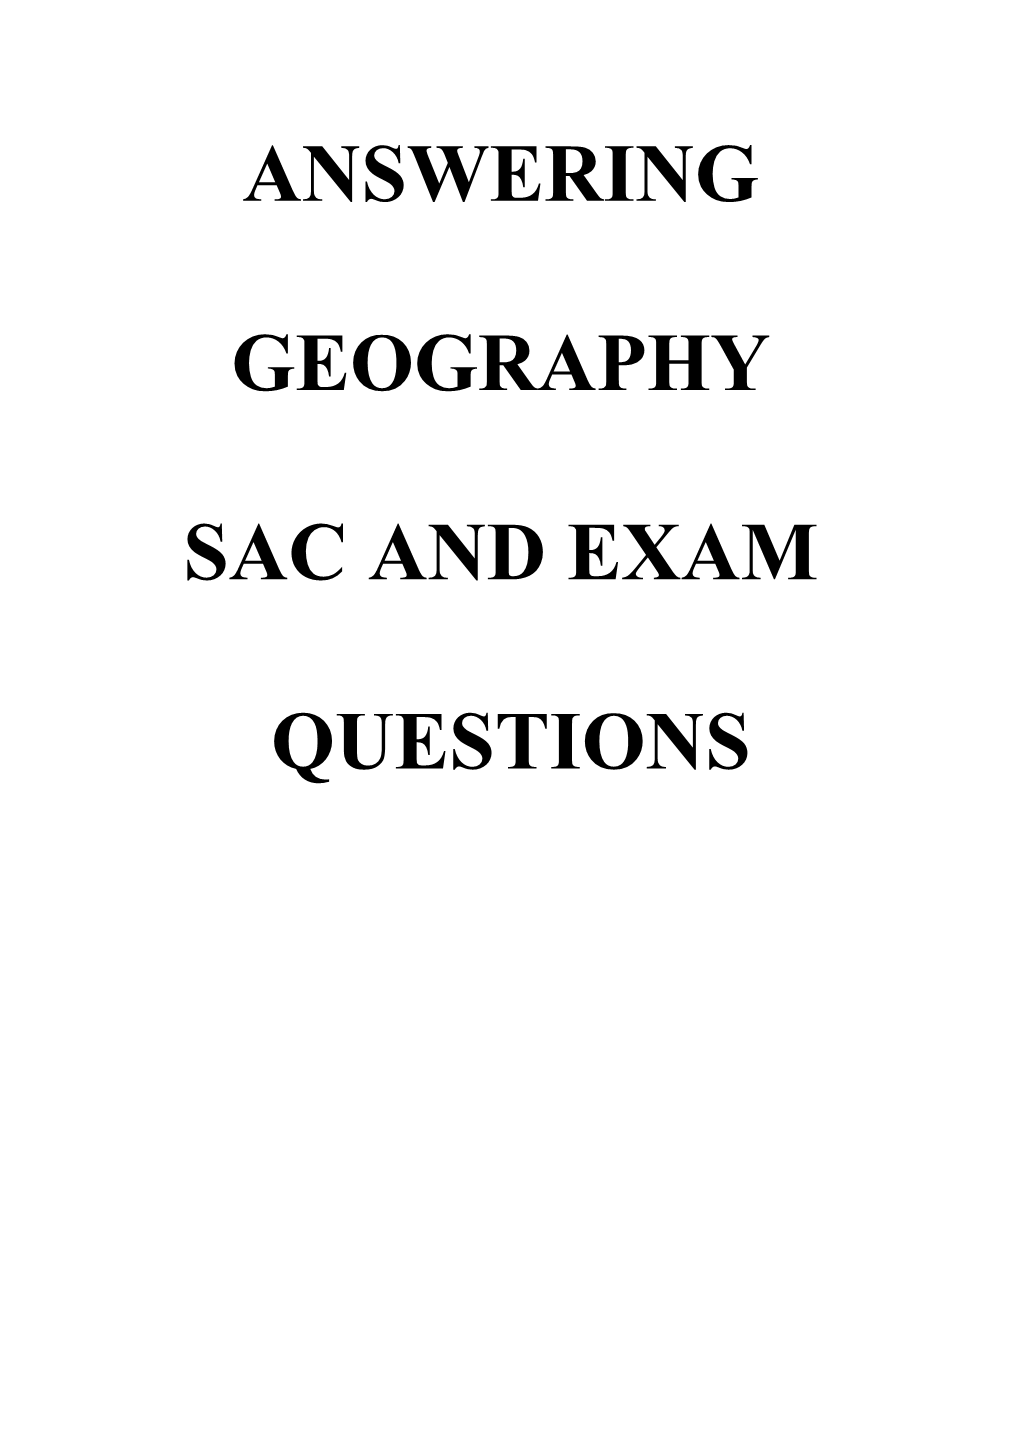 Answering Geography Sac and Exam Questions